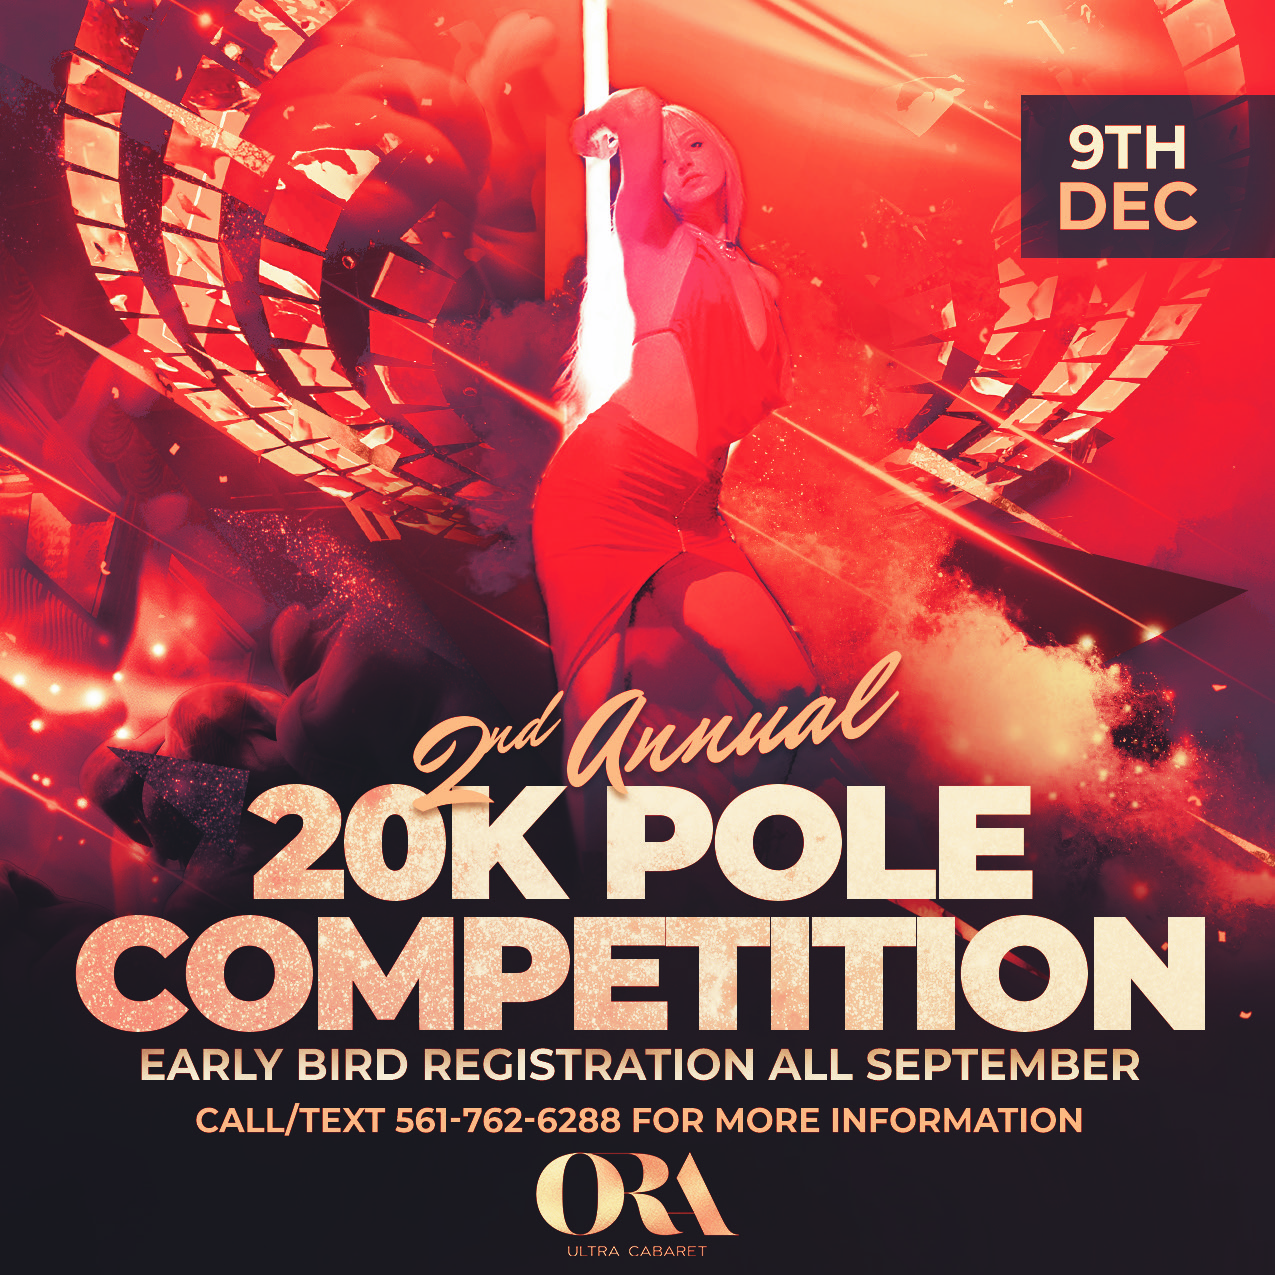 2nd Annual 20K Pole Competition